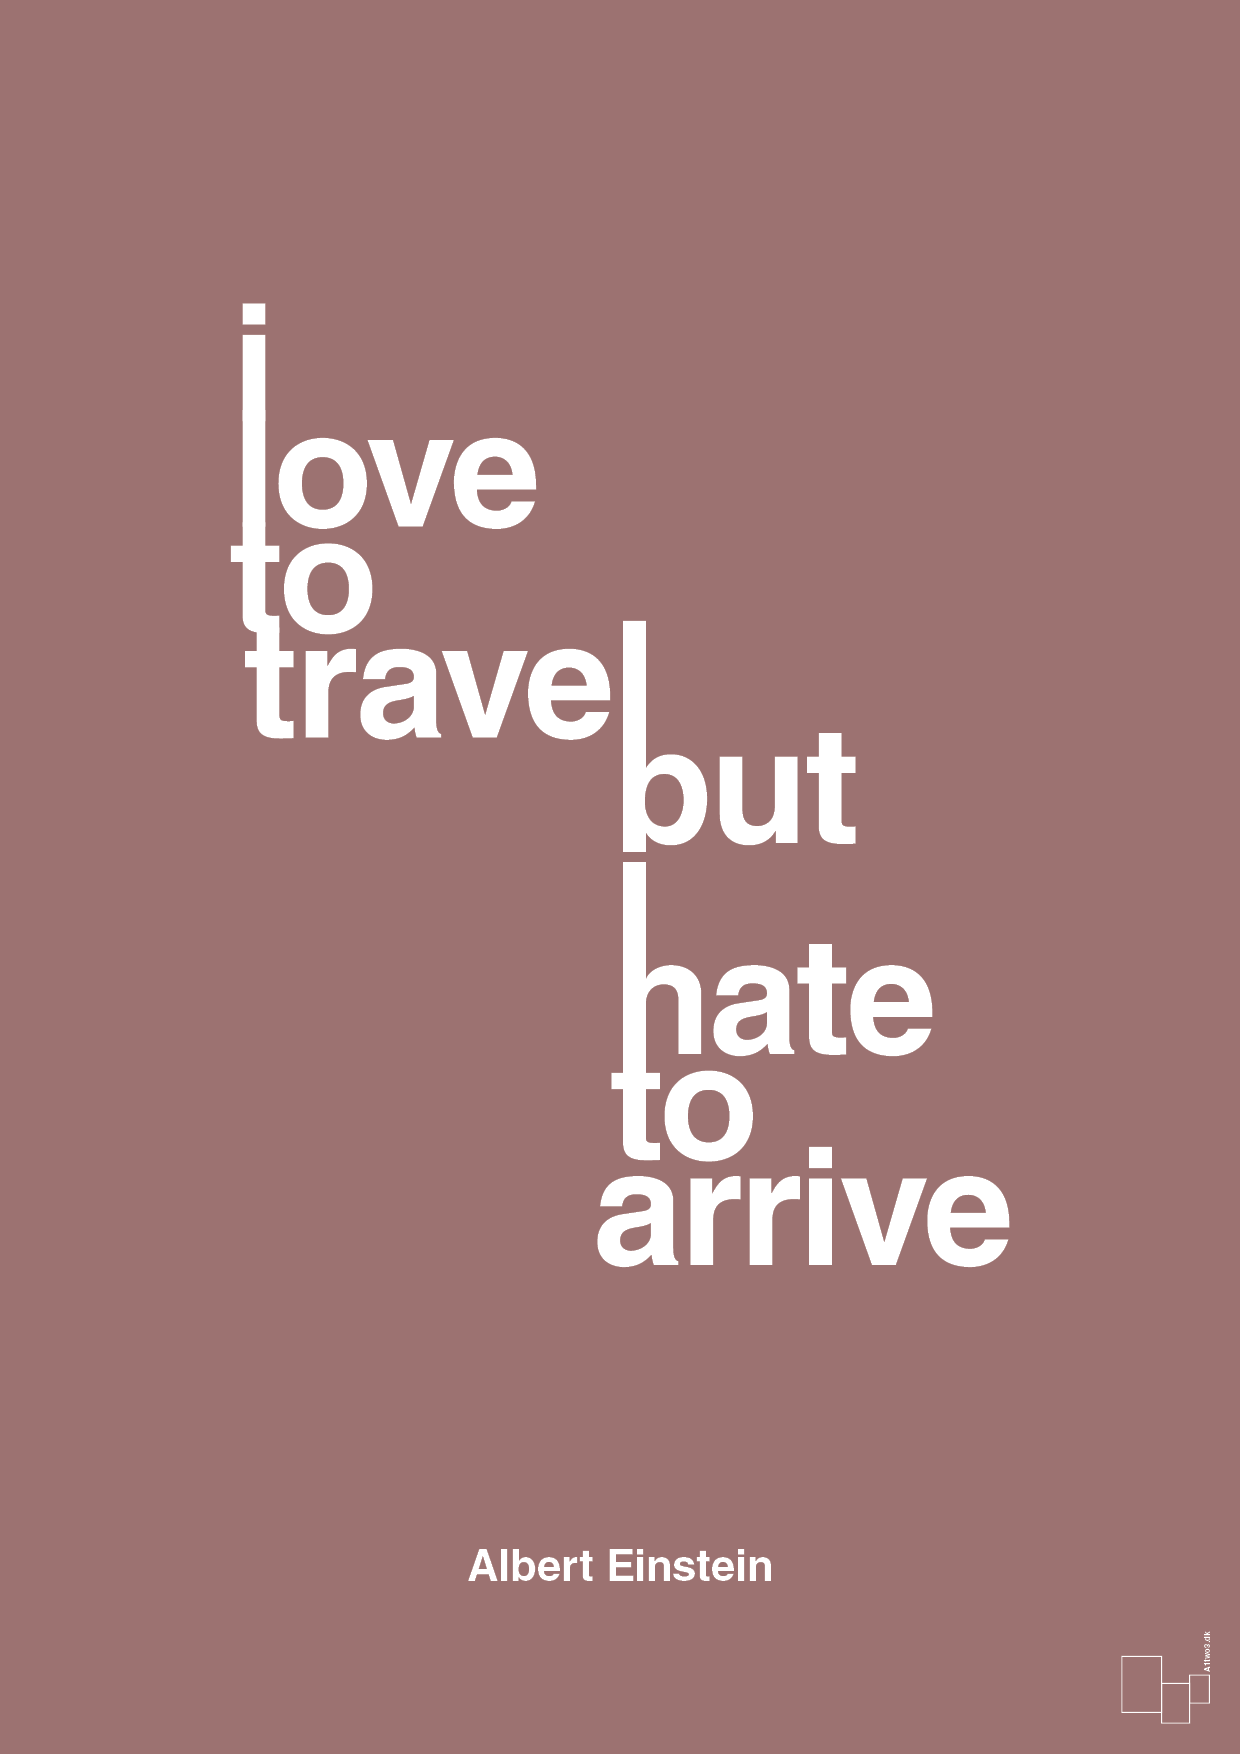 i love to travel but hate to arrive - Plakat med Citater i Plum